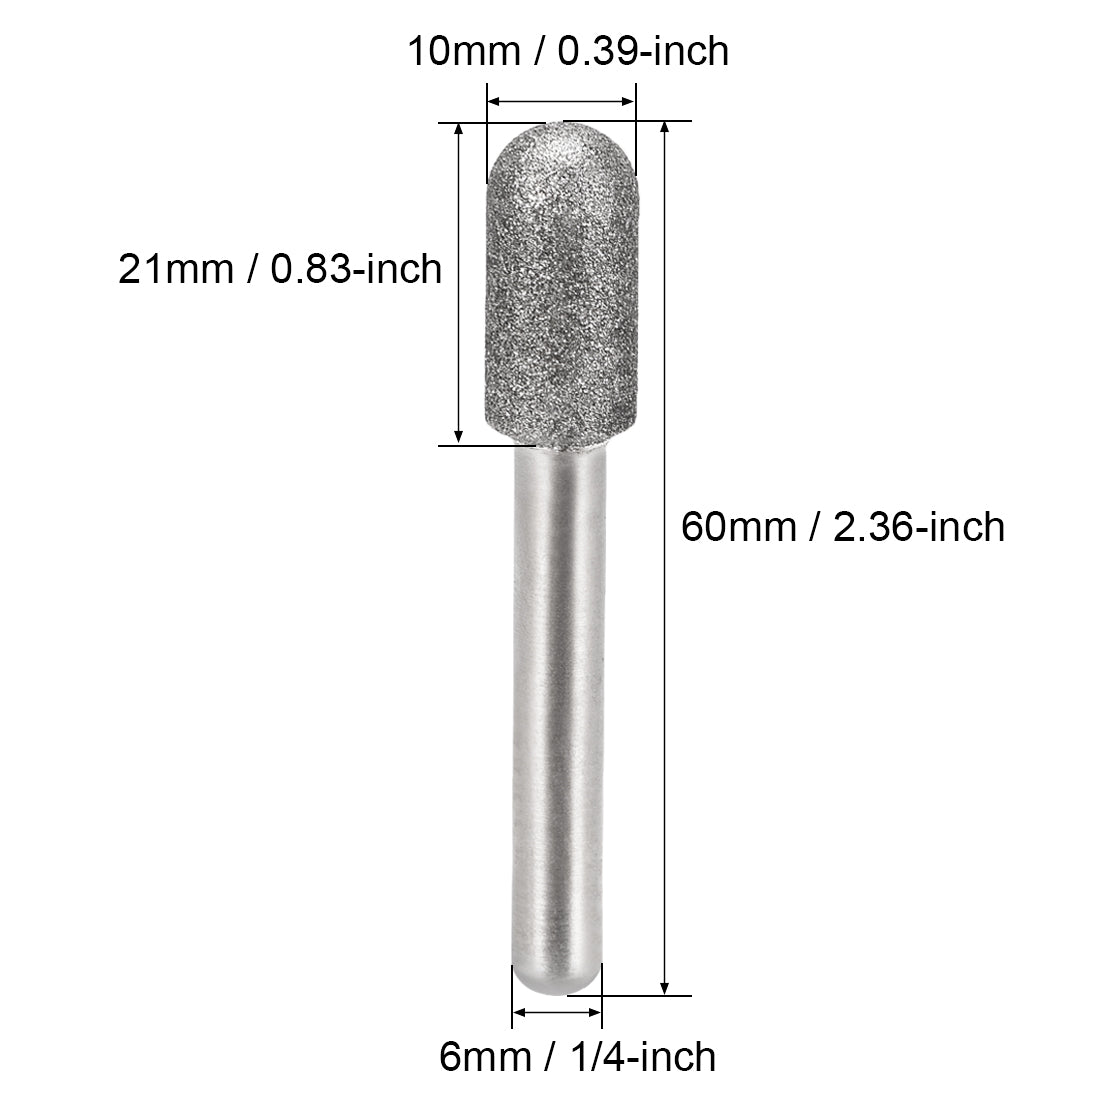 Uxcell Uxcell Diamond Burrs Grinding Drill Bits for Carving Rotary Tool 1/4-Inch Shank 10mm Cylindrical Ball Nose 150 Grit 5 Pcs